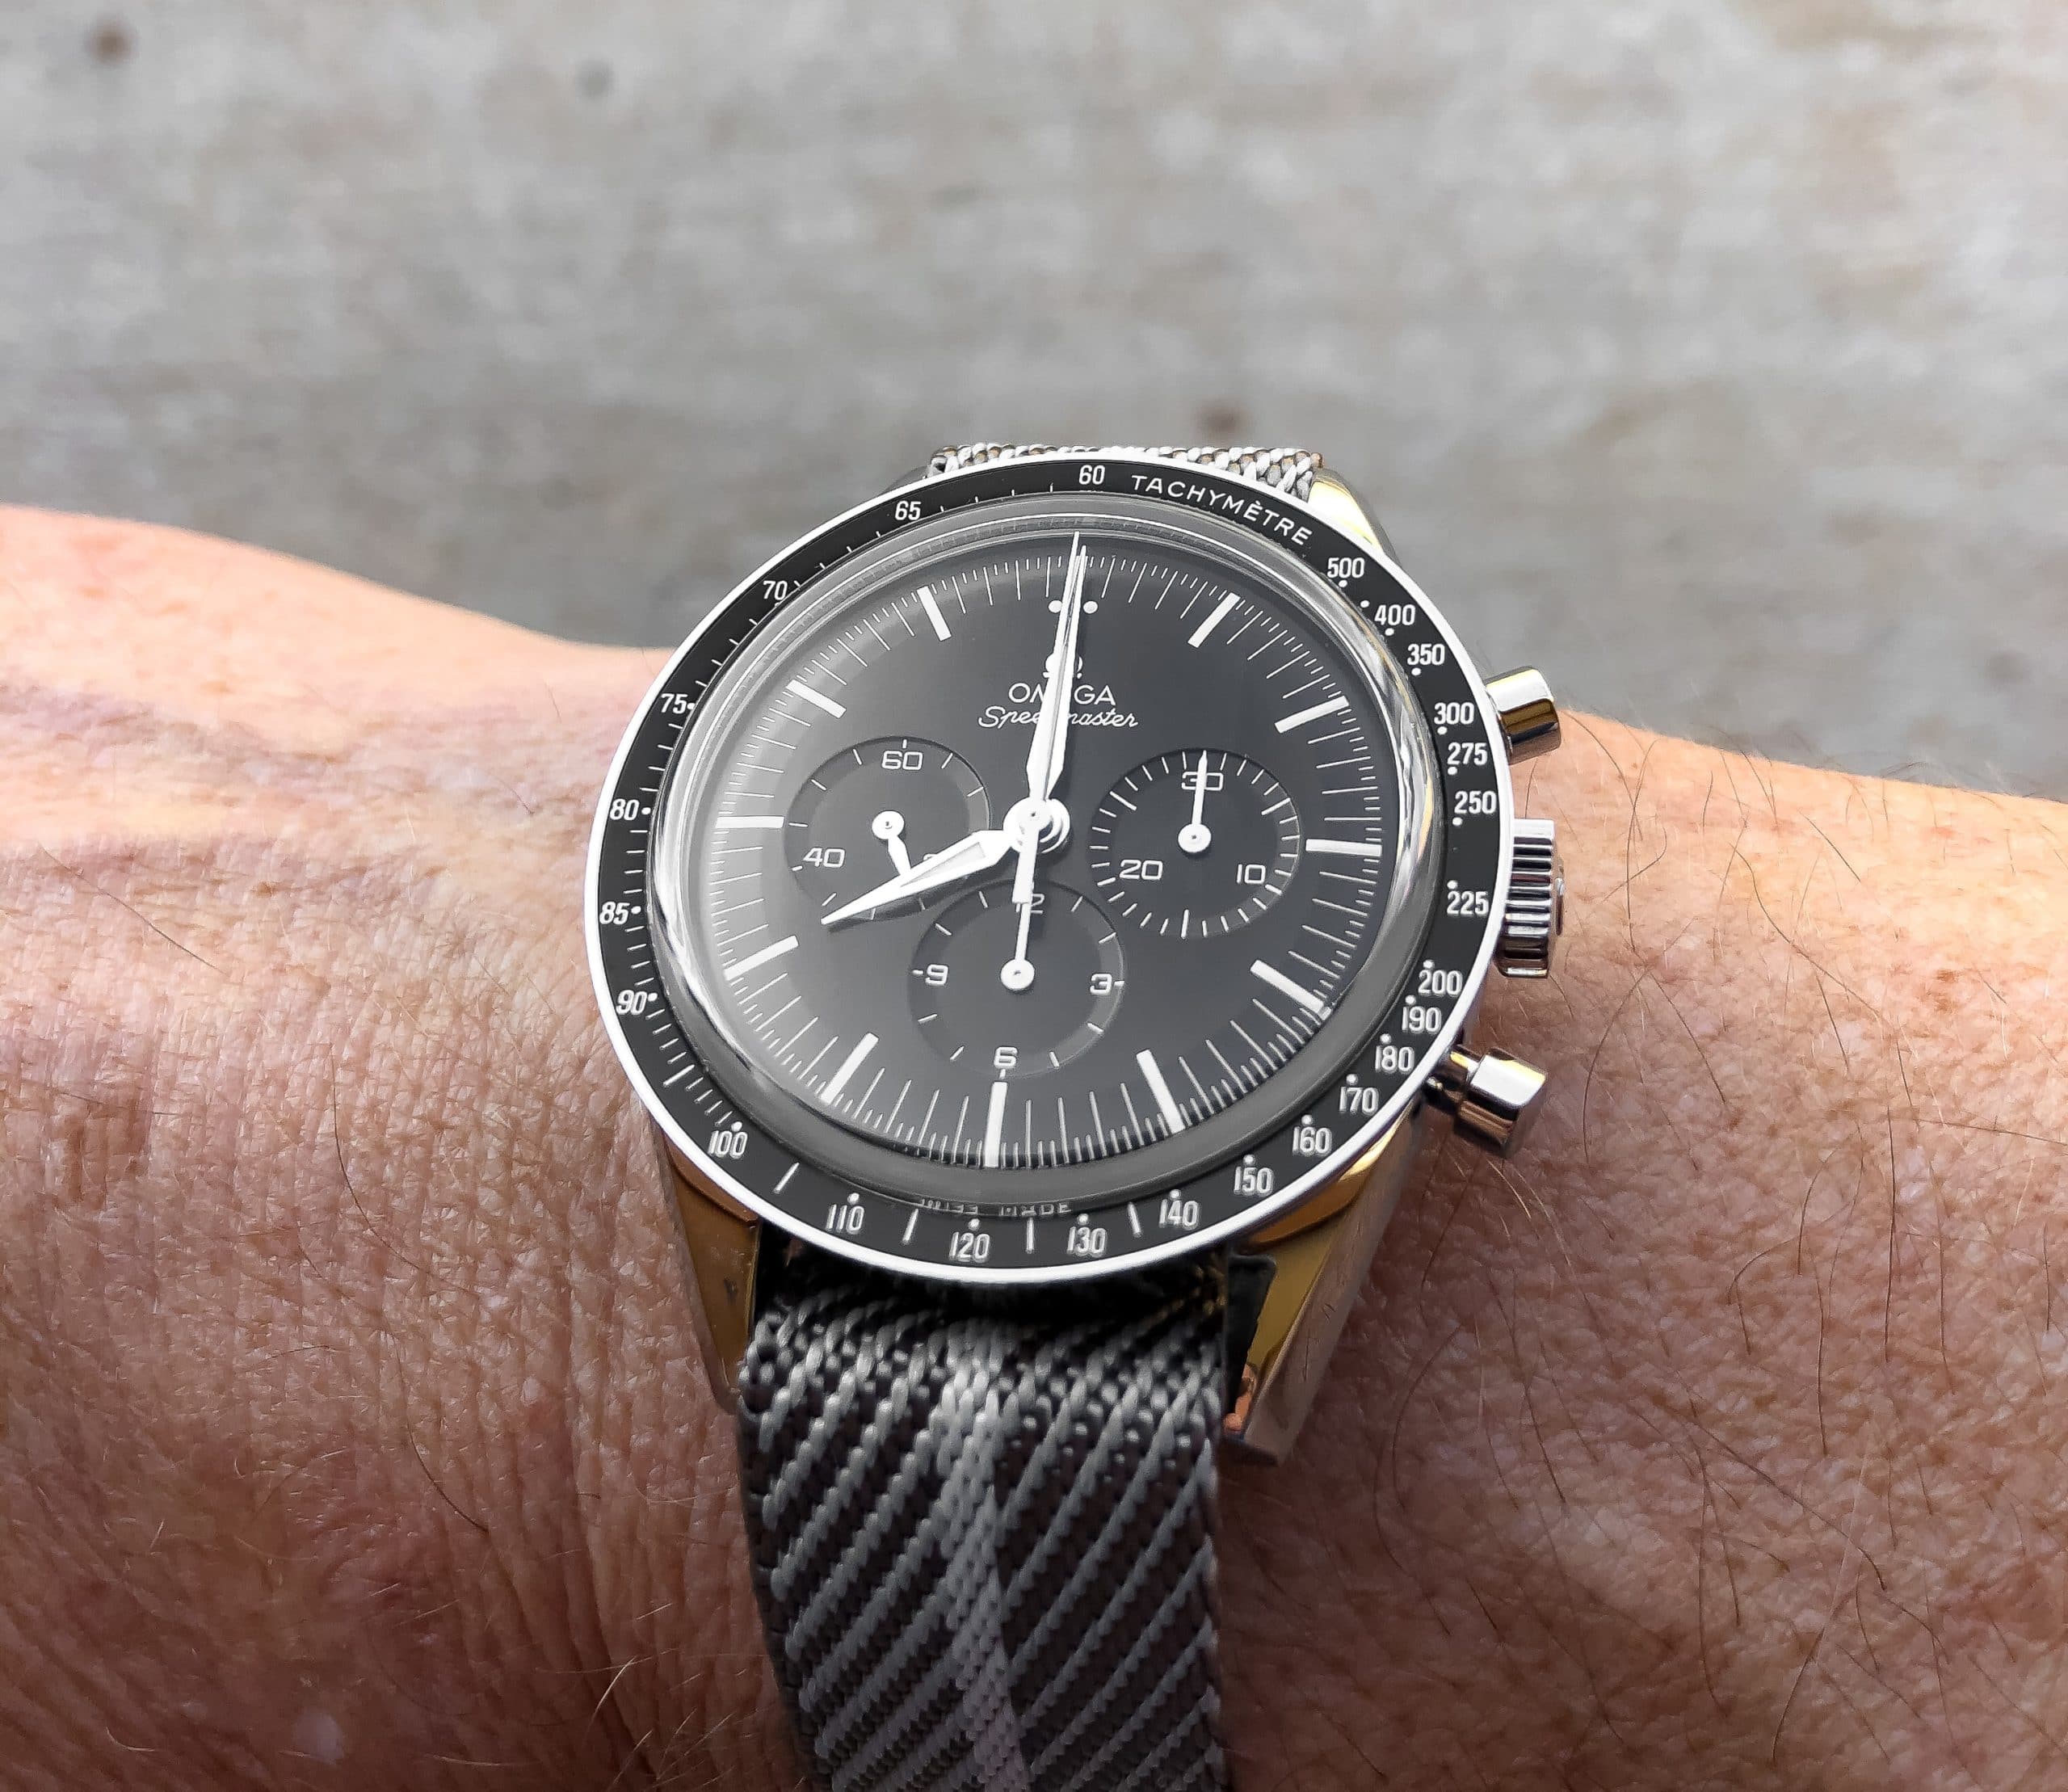 First Omega in Space Review: Numbered 